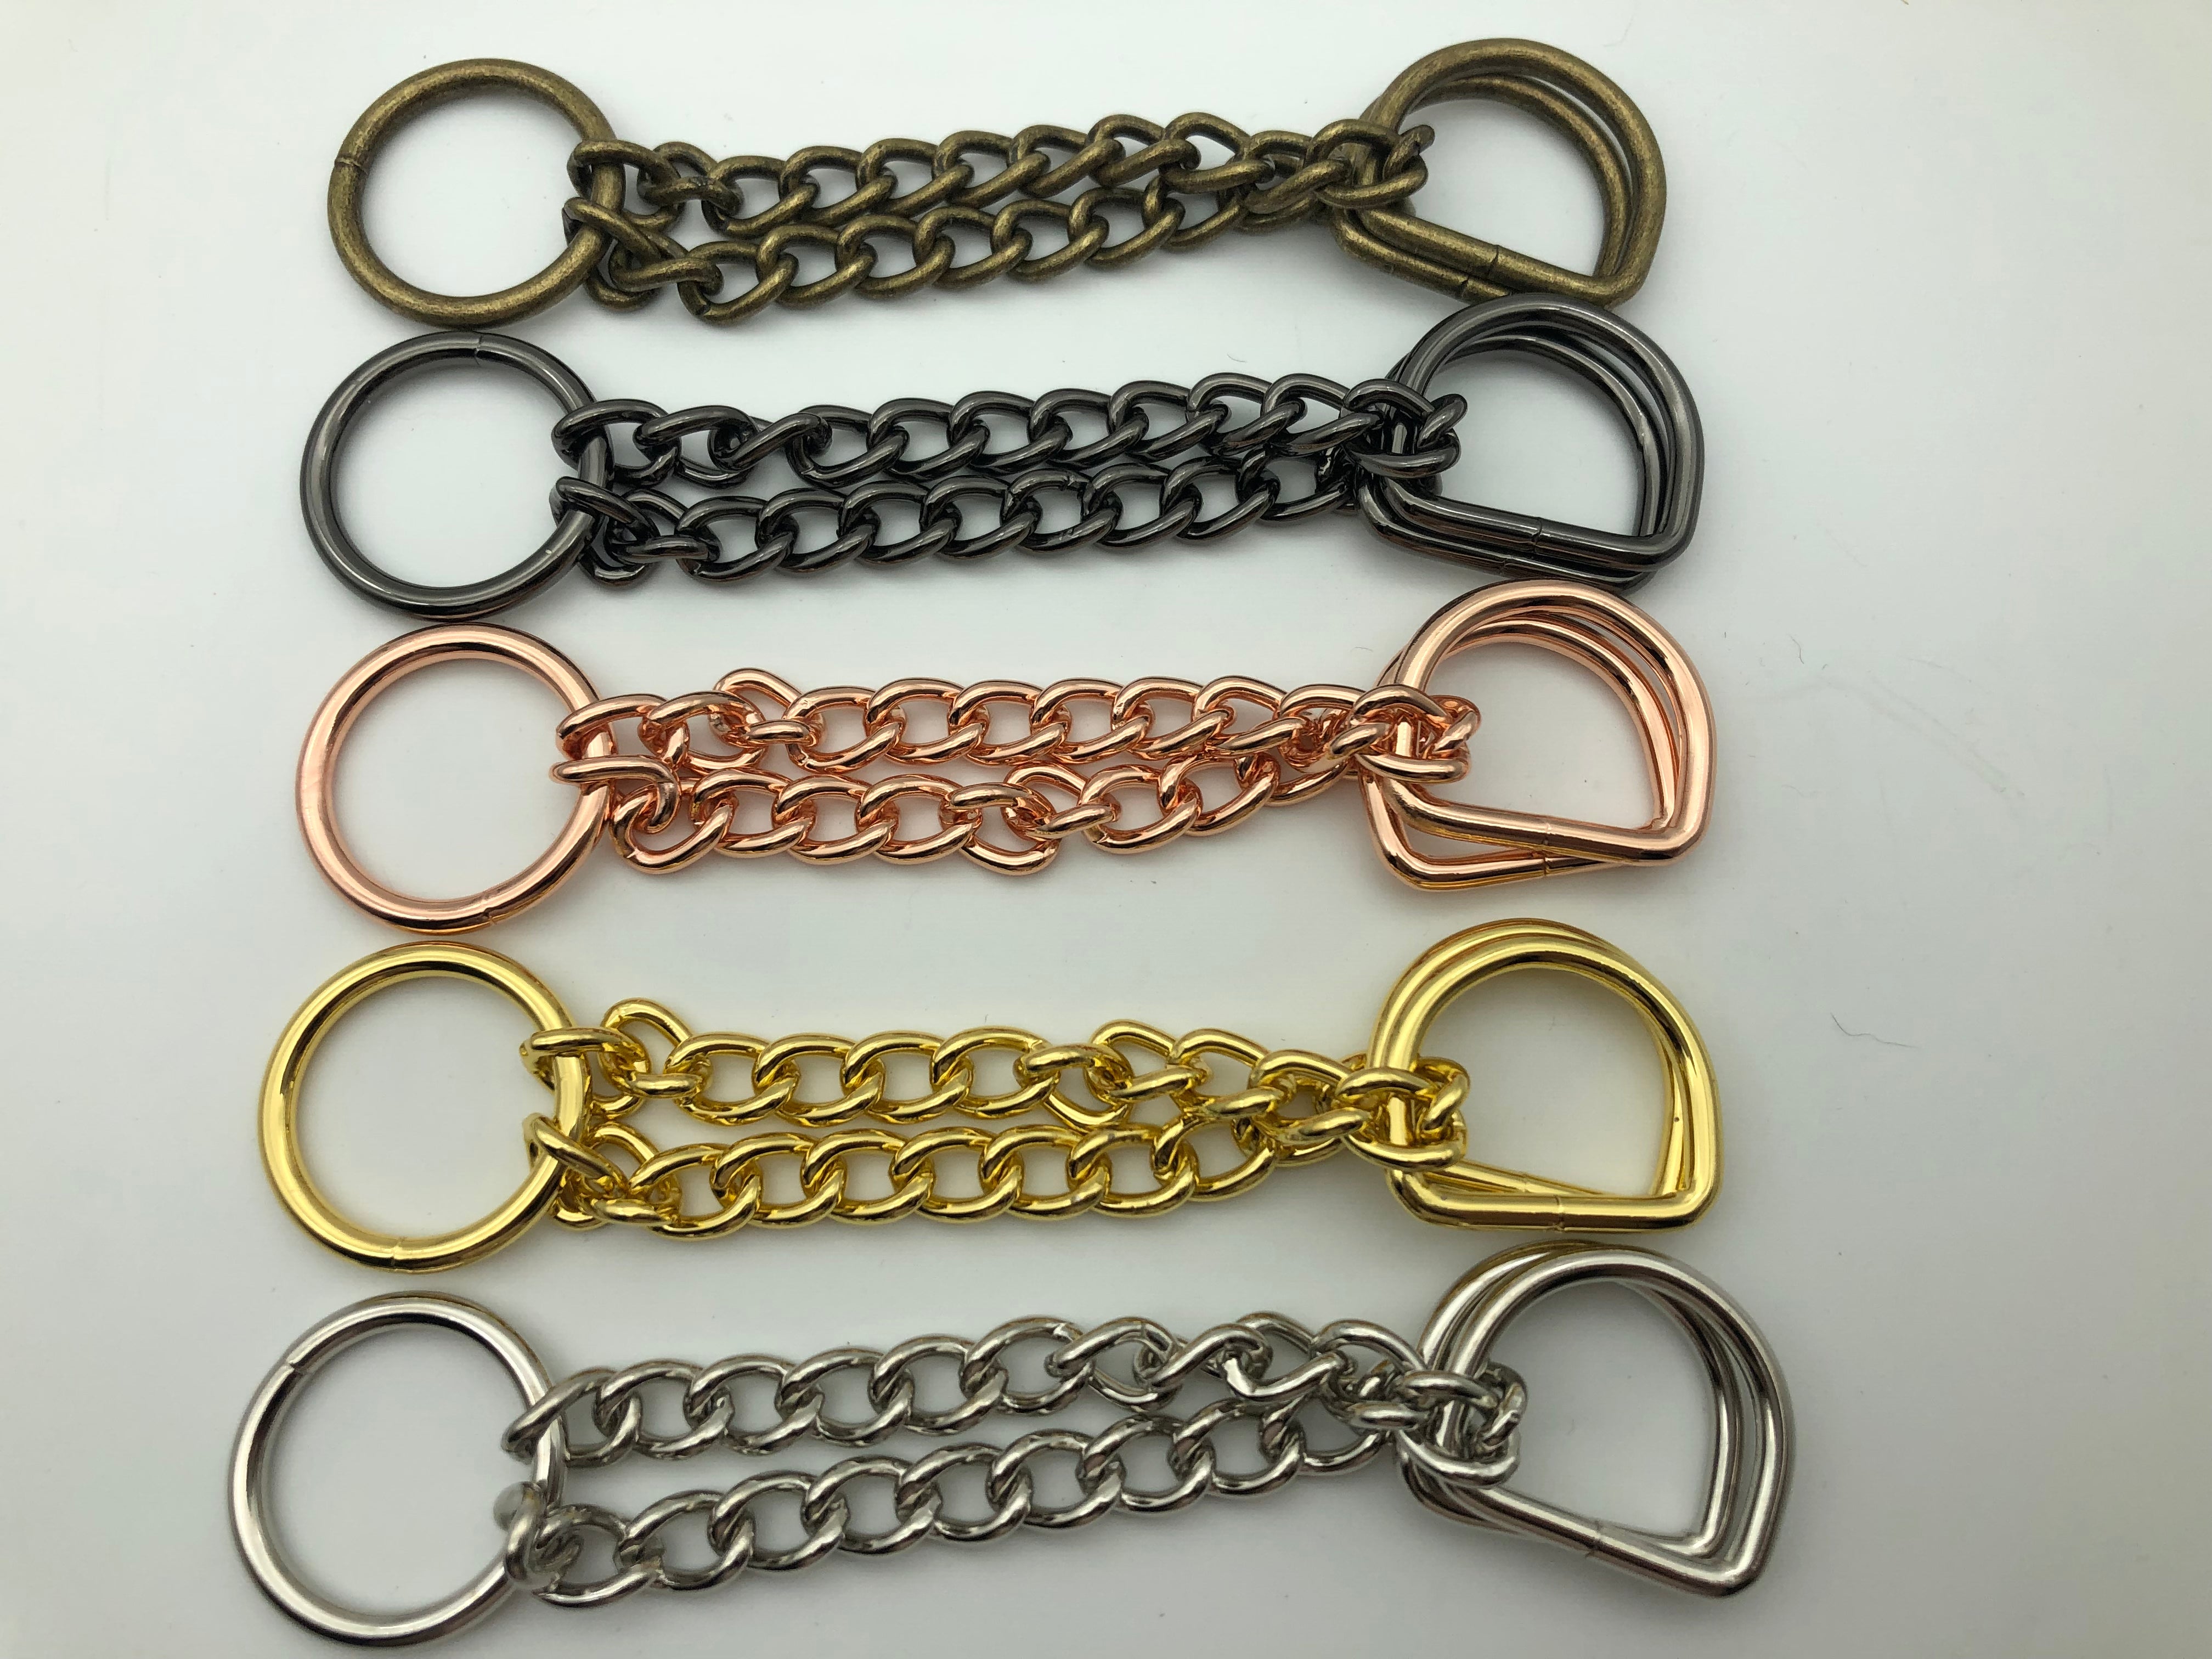 5 sets, Martingale Collar hardware sets, weld chain & rings-5 colors